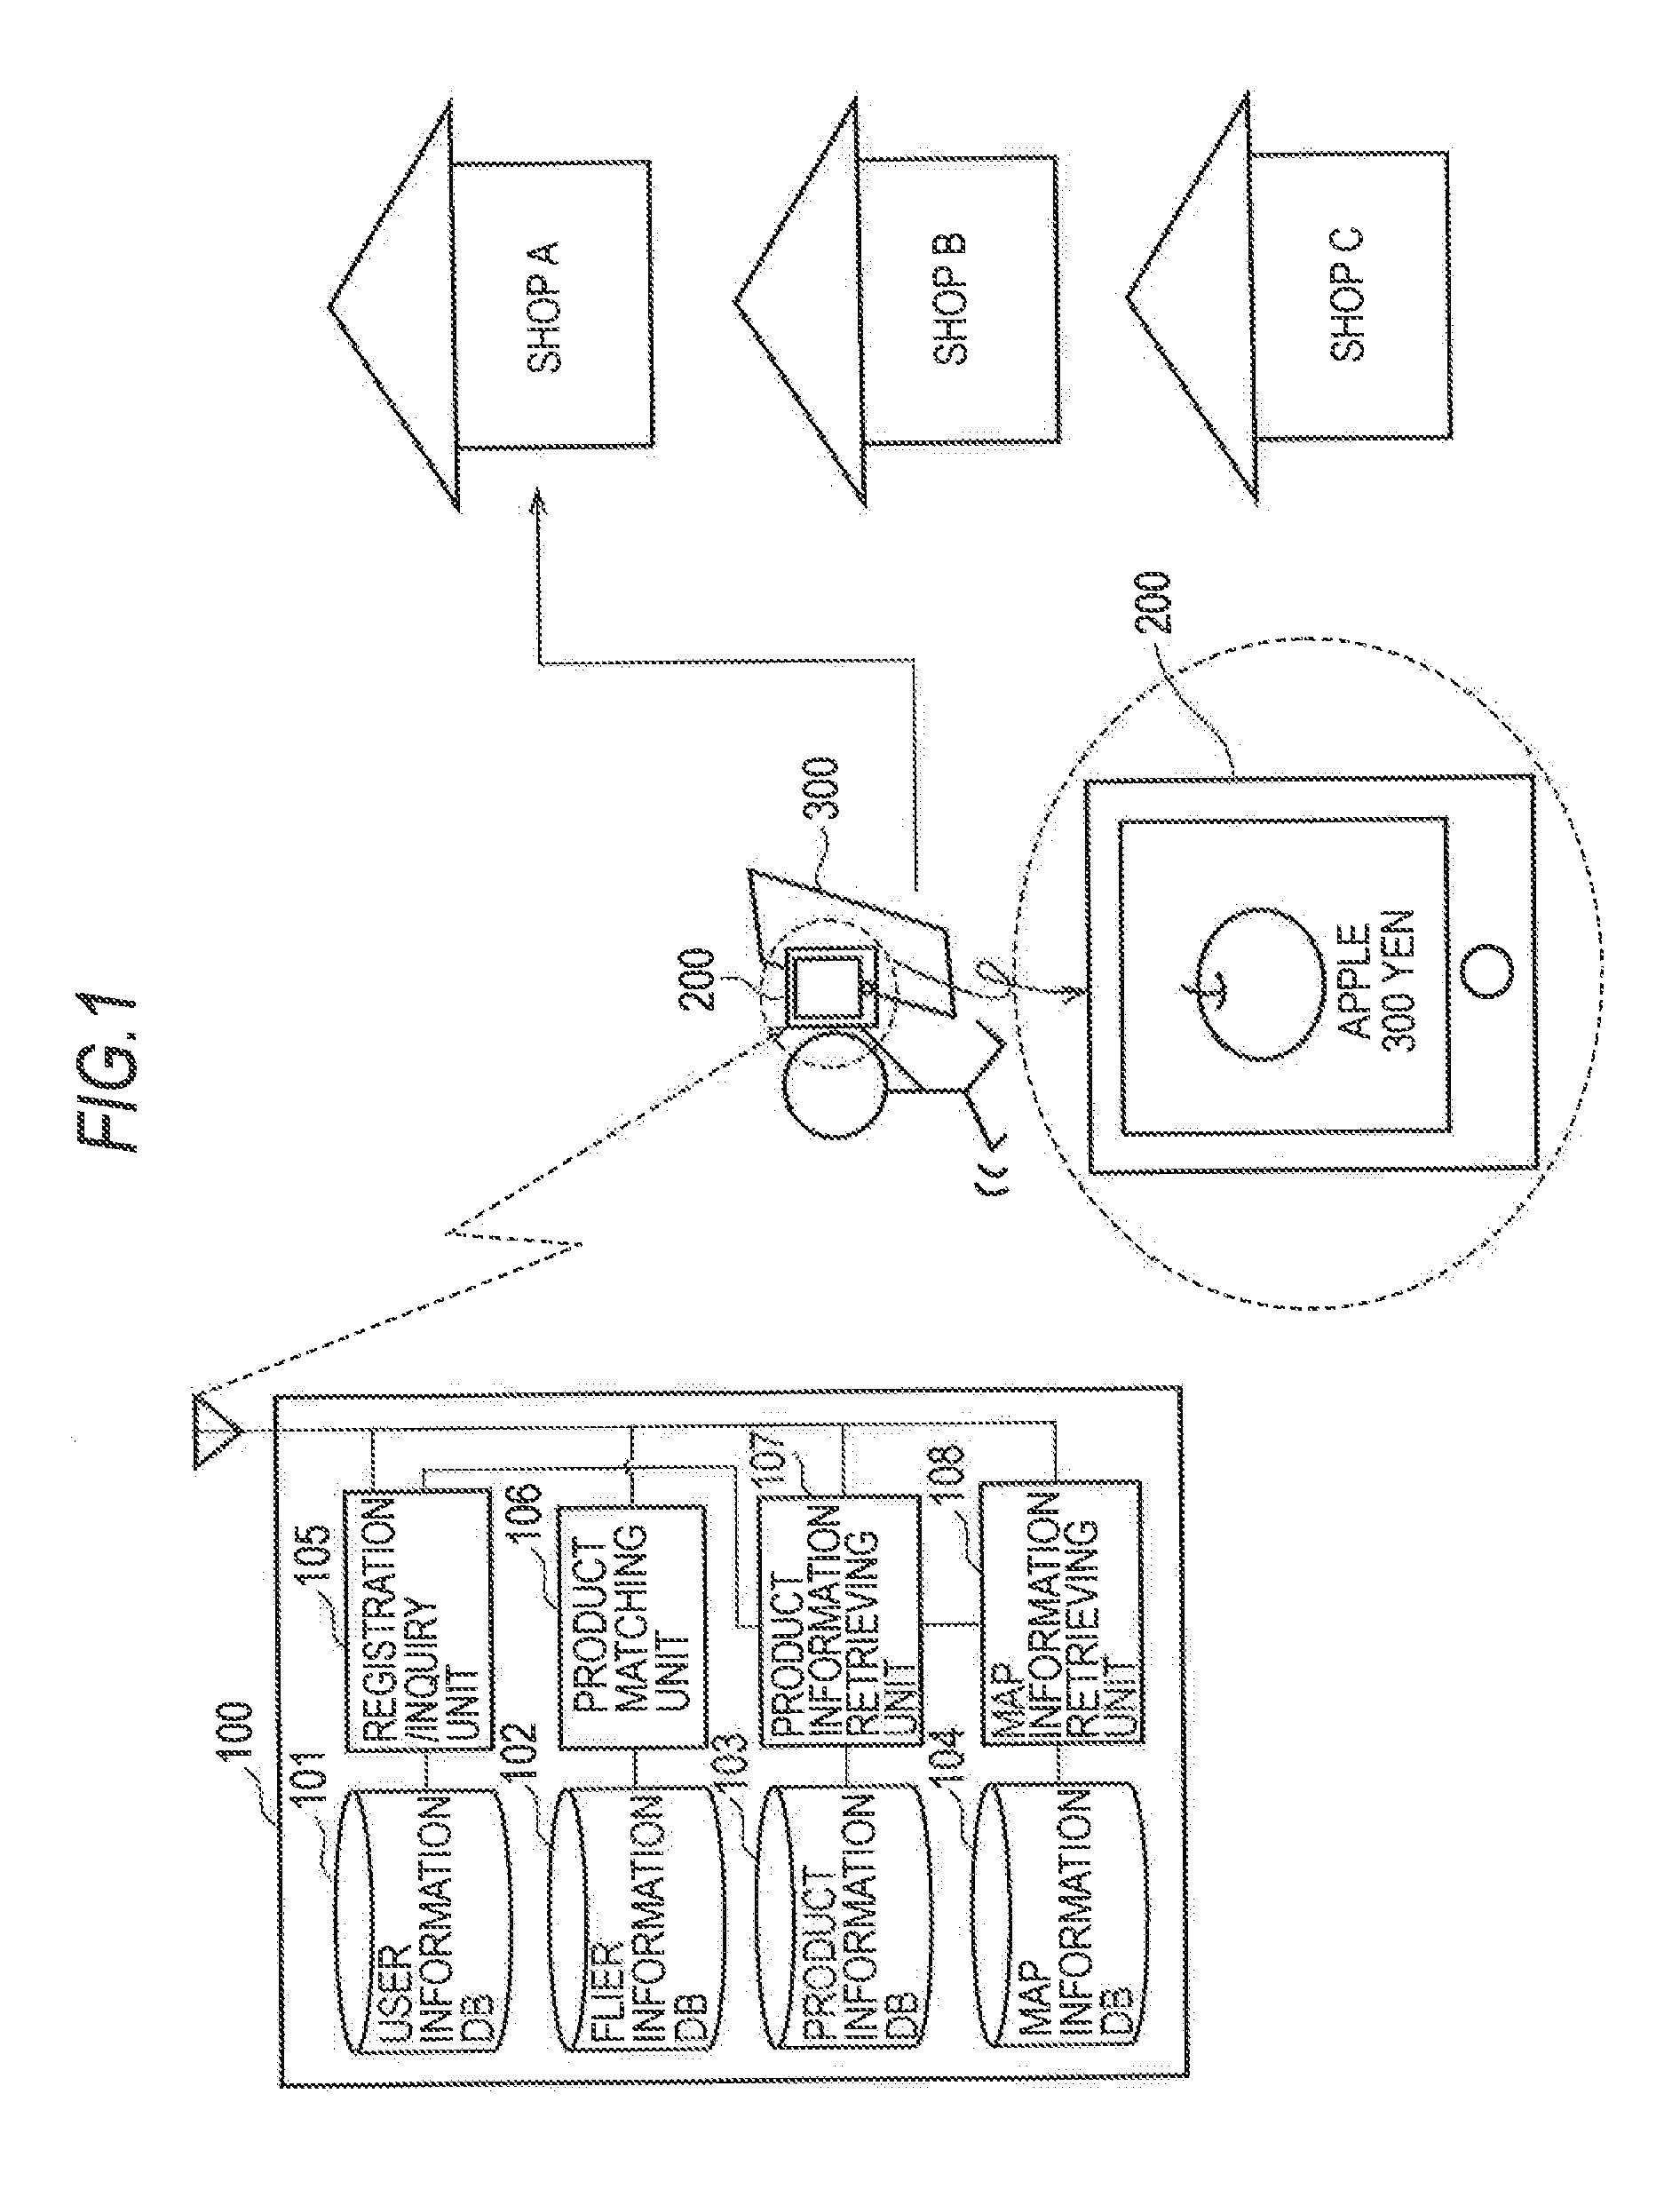 Information processing system, information processing method and program, information processing apparatus, vacant space guidance system, vacant space guidance method and program, image display system, image display method and program